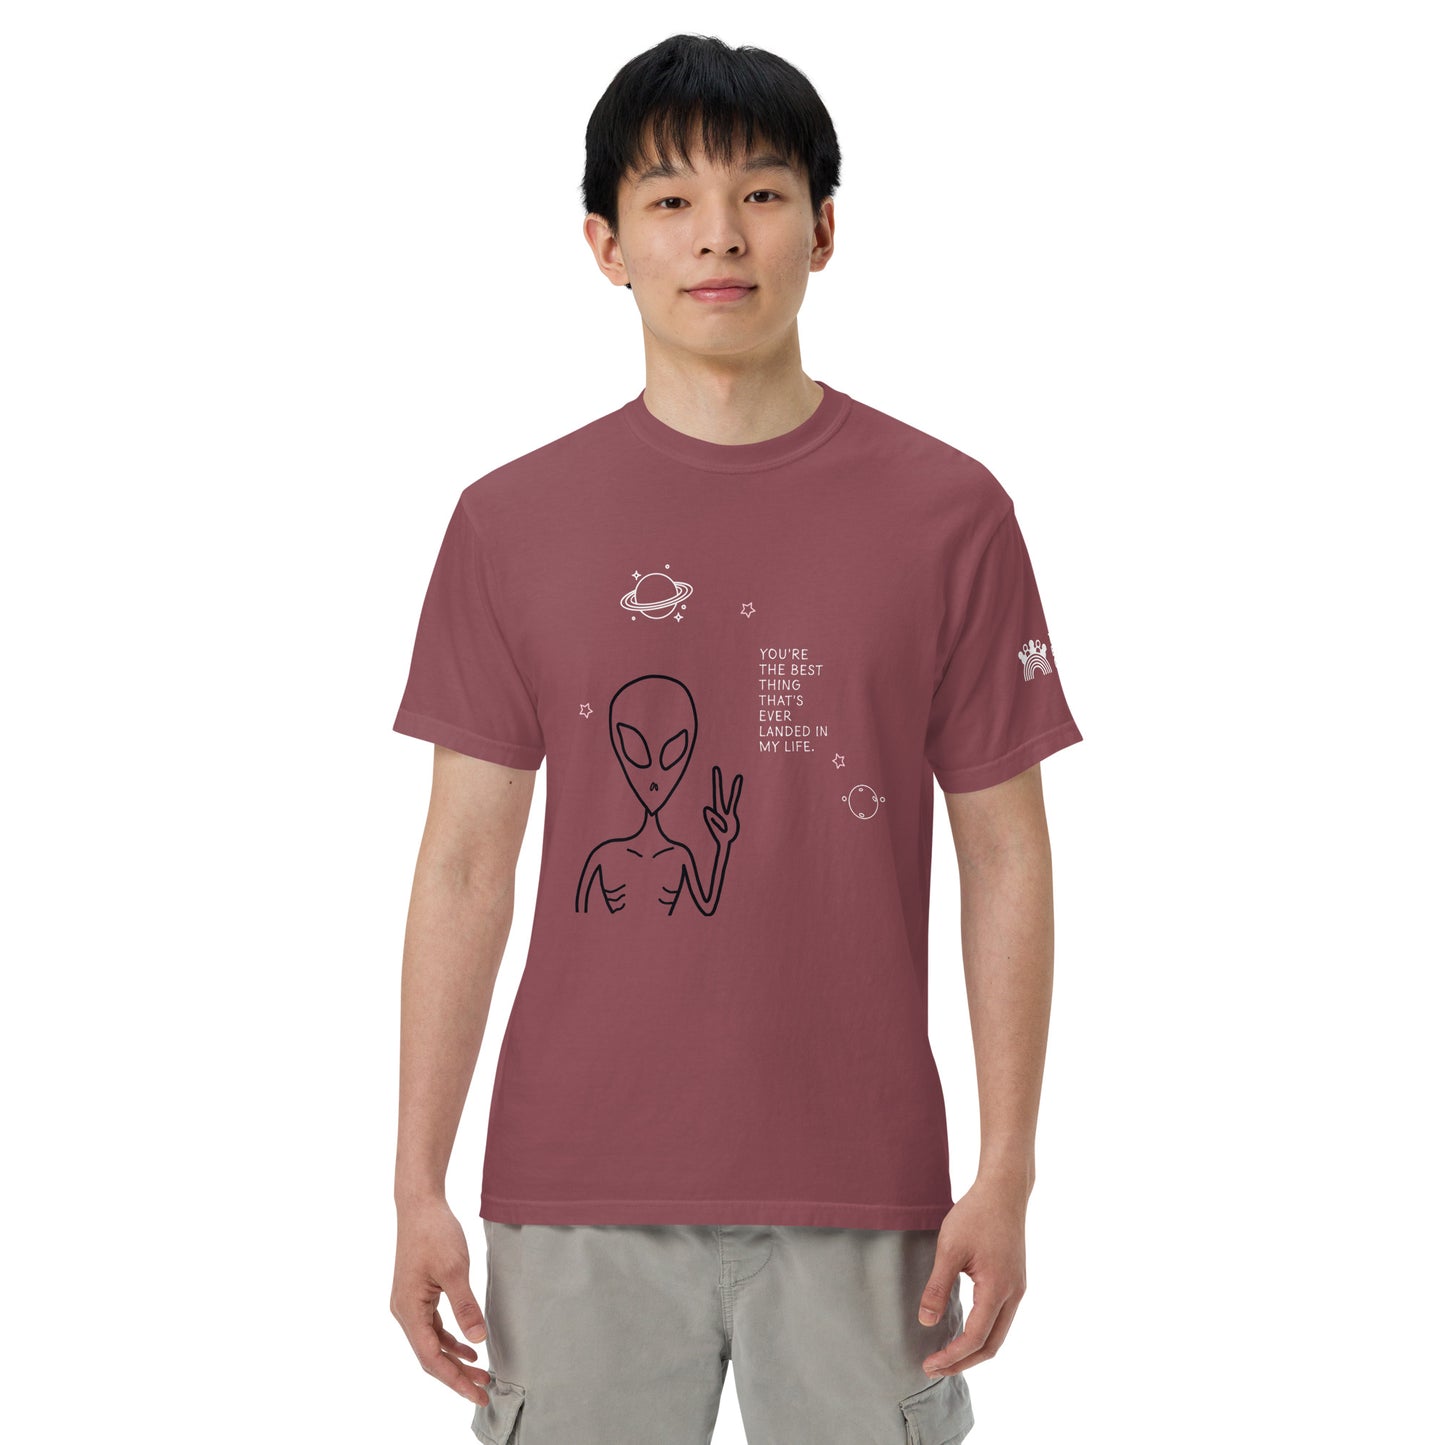 The Equality Crew Alien T-shirt